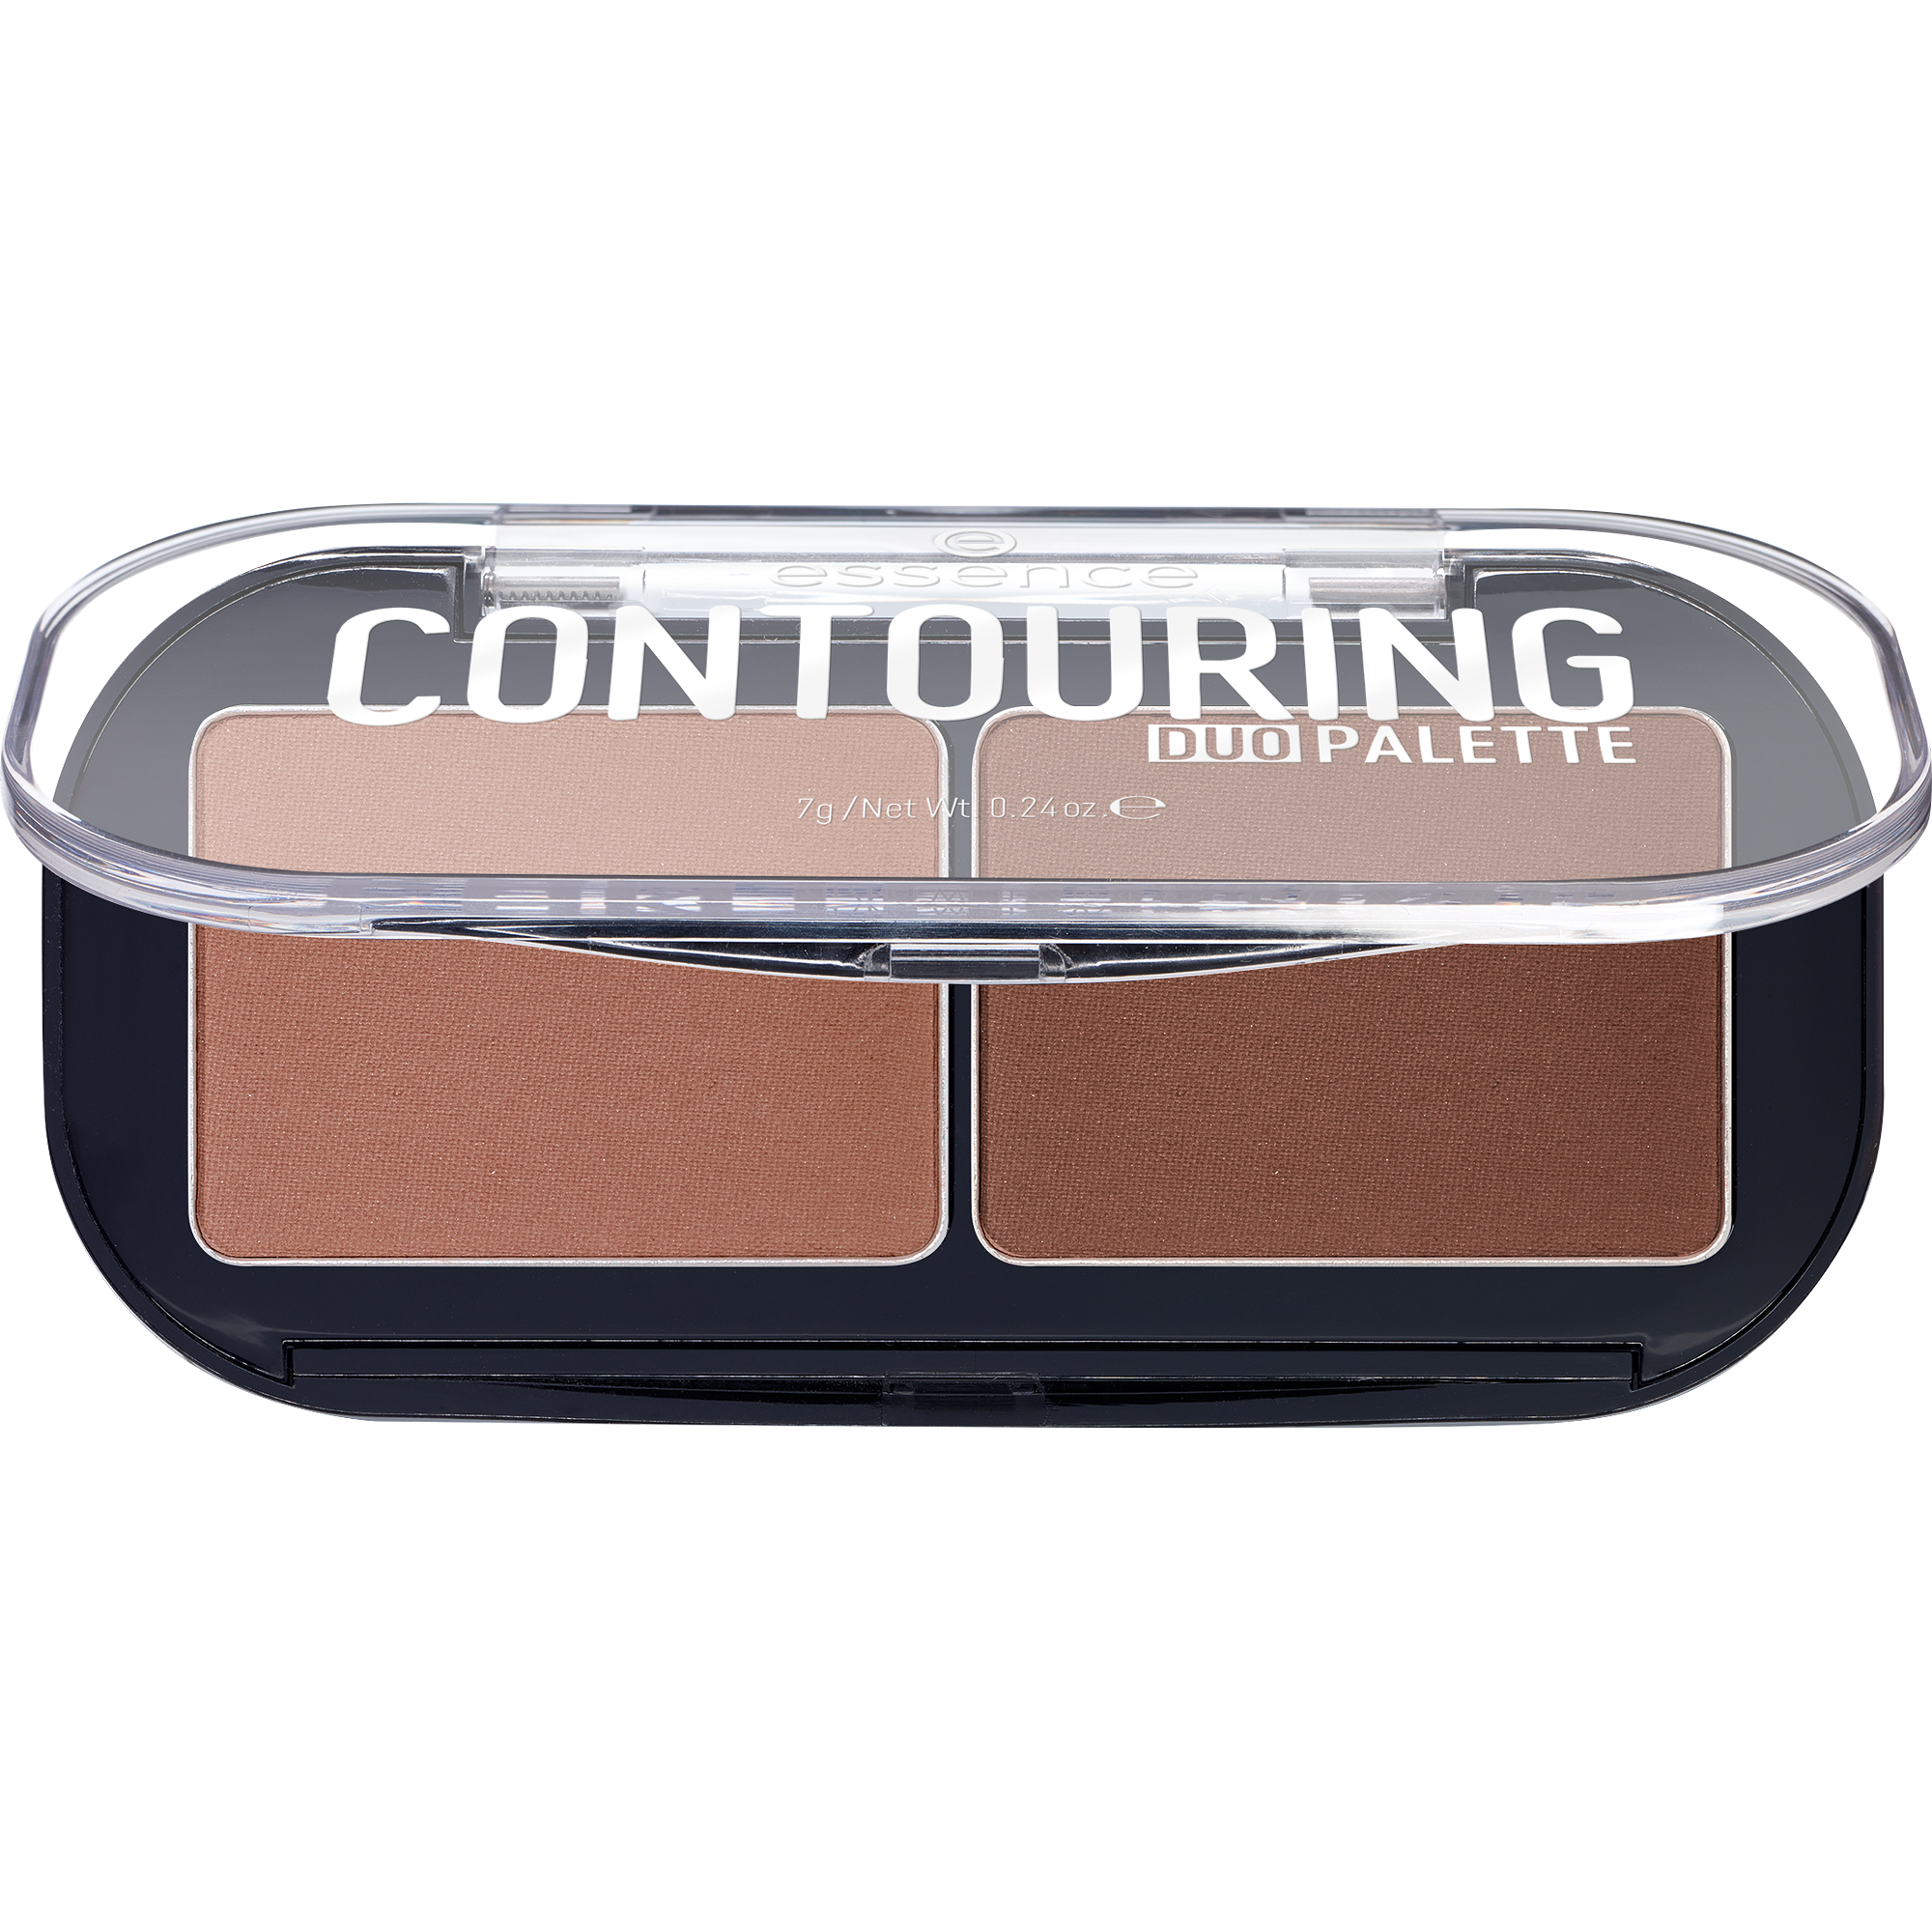 CONTOURING DUO PALETTE